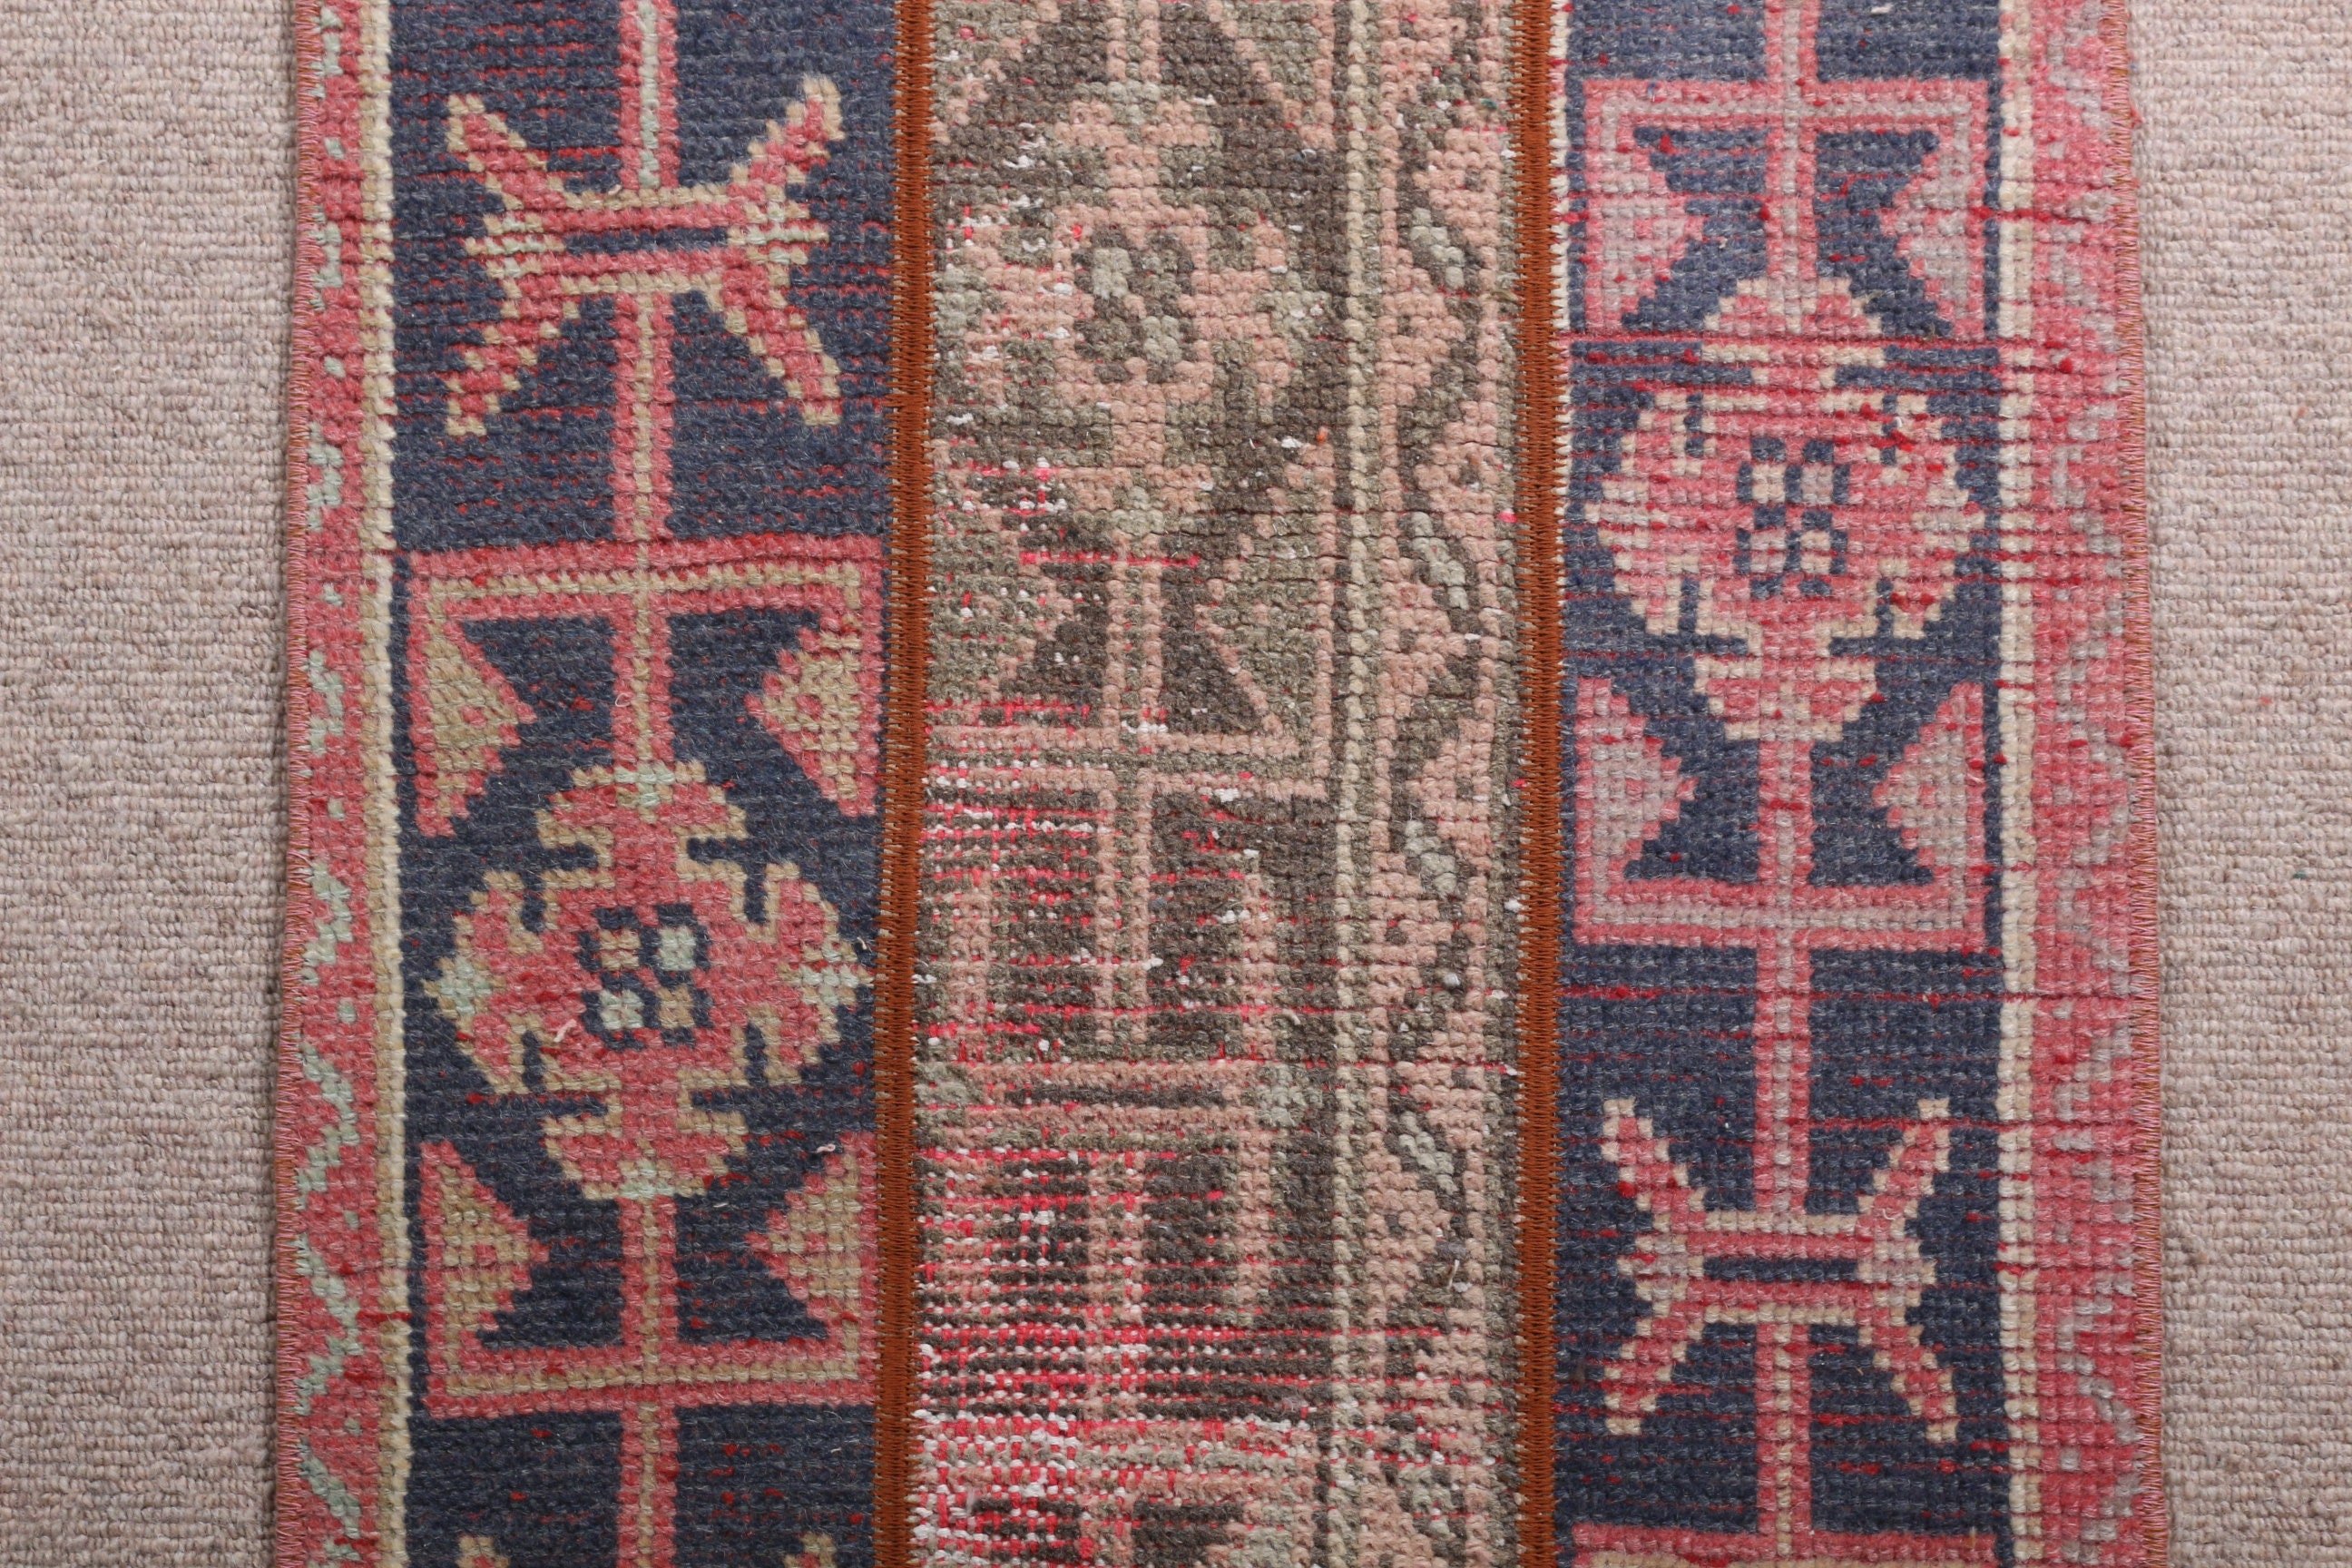 Vintage Rug, Turkish Rug, Bathroom Rug, Red  1.7x3.7 ft Small Rug, Cool Rugs, Rugs for Kitchen, Antique Rug, Entry Rugs